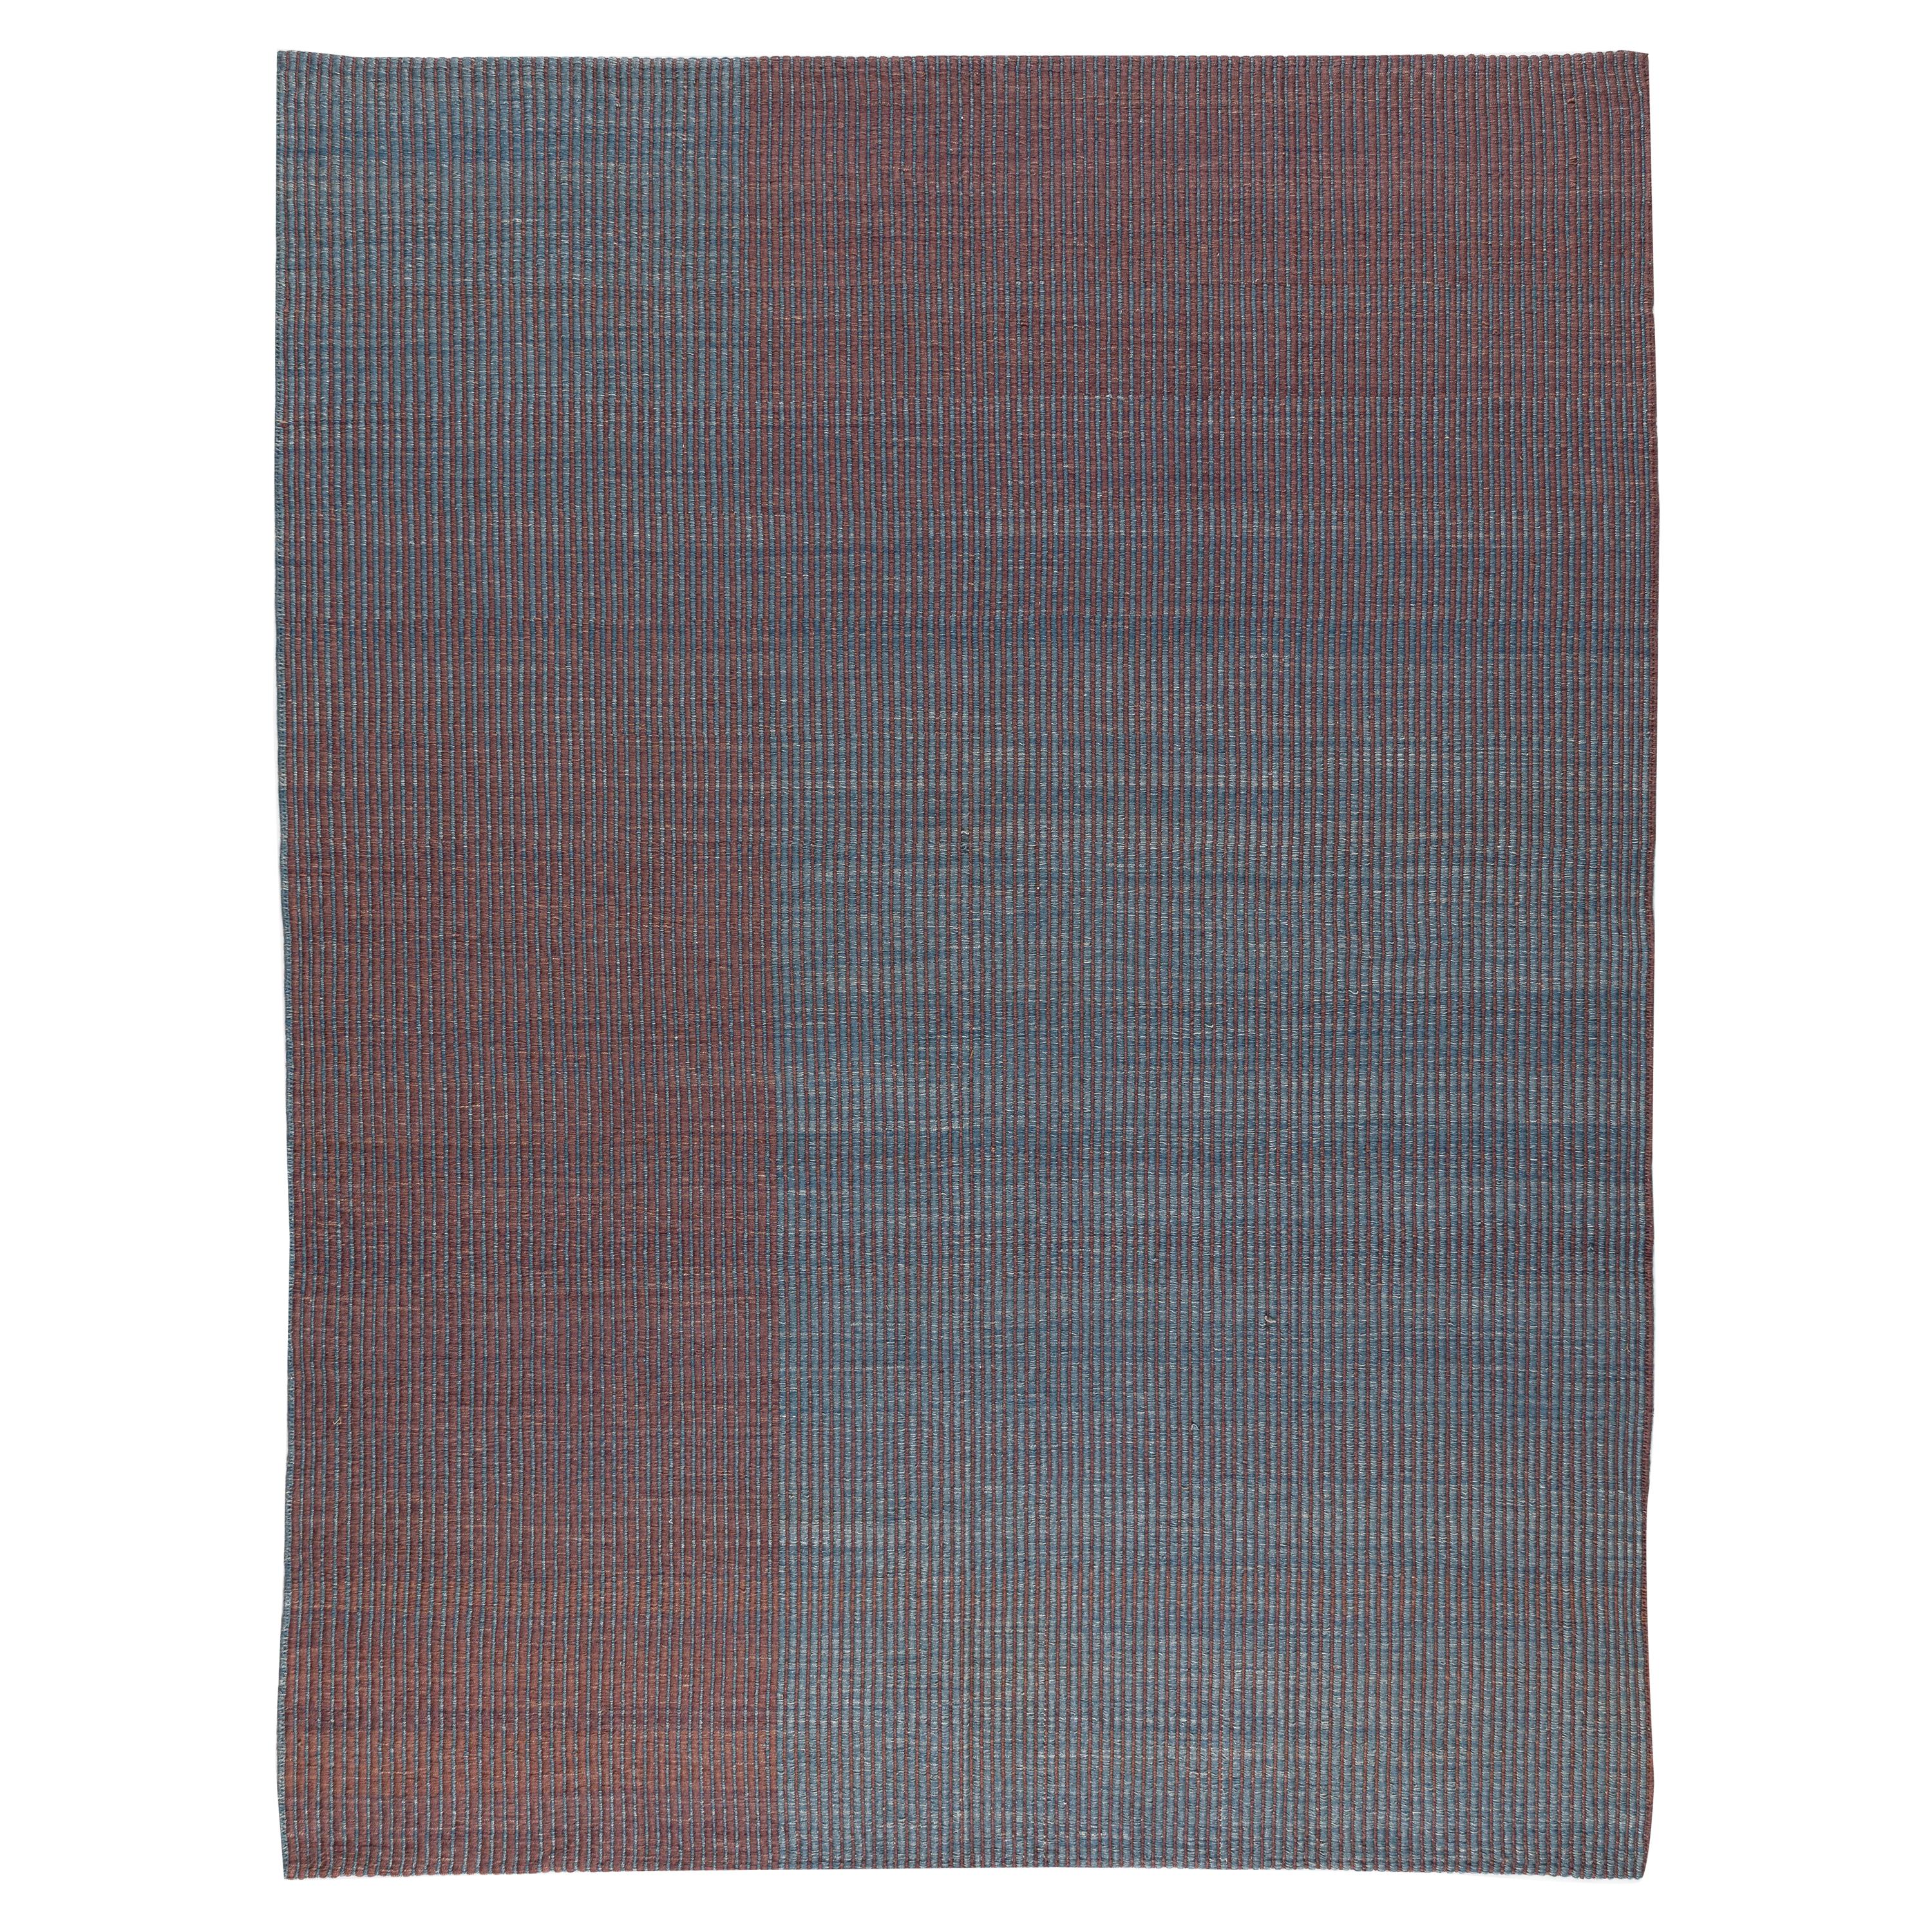 Haze Contemporary Kilim Wool Rug Handwoven in Blue and Purple